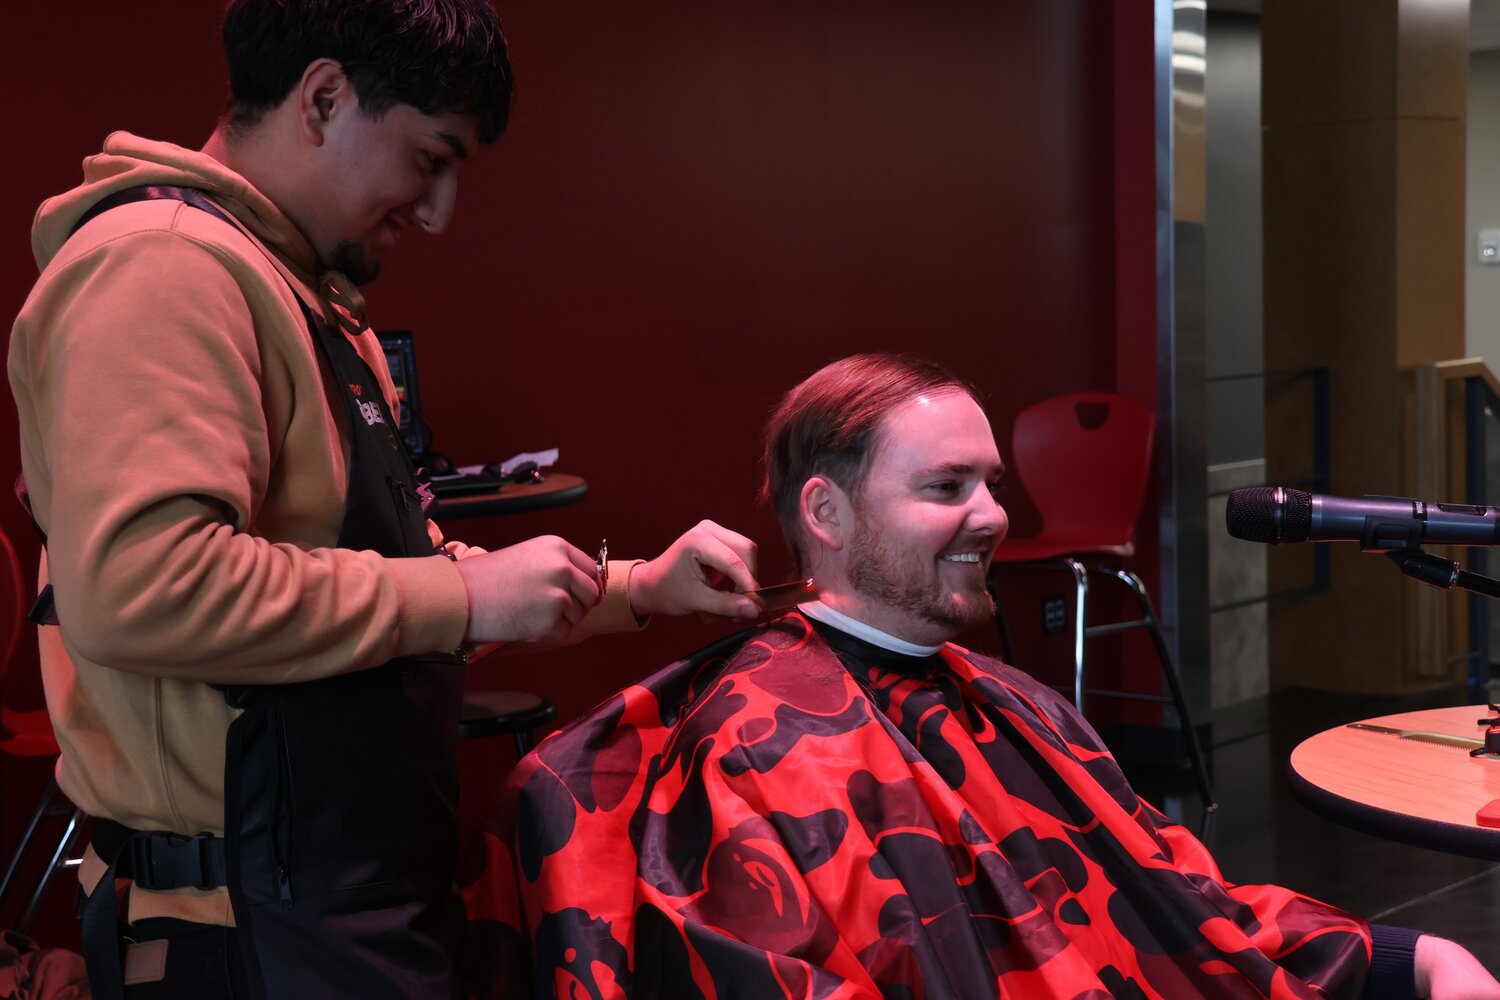 Justin Cabrera, a budding talent in the field of cosmetology, cuts the hair of Toledo Superintendent Brennan Bailey in this photo provided by the school district.